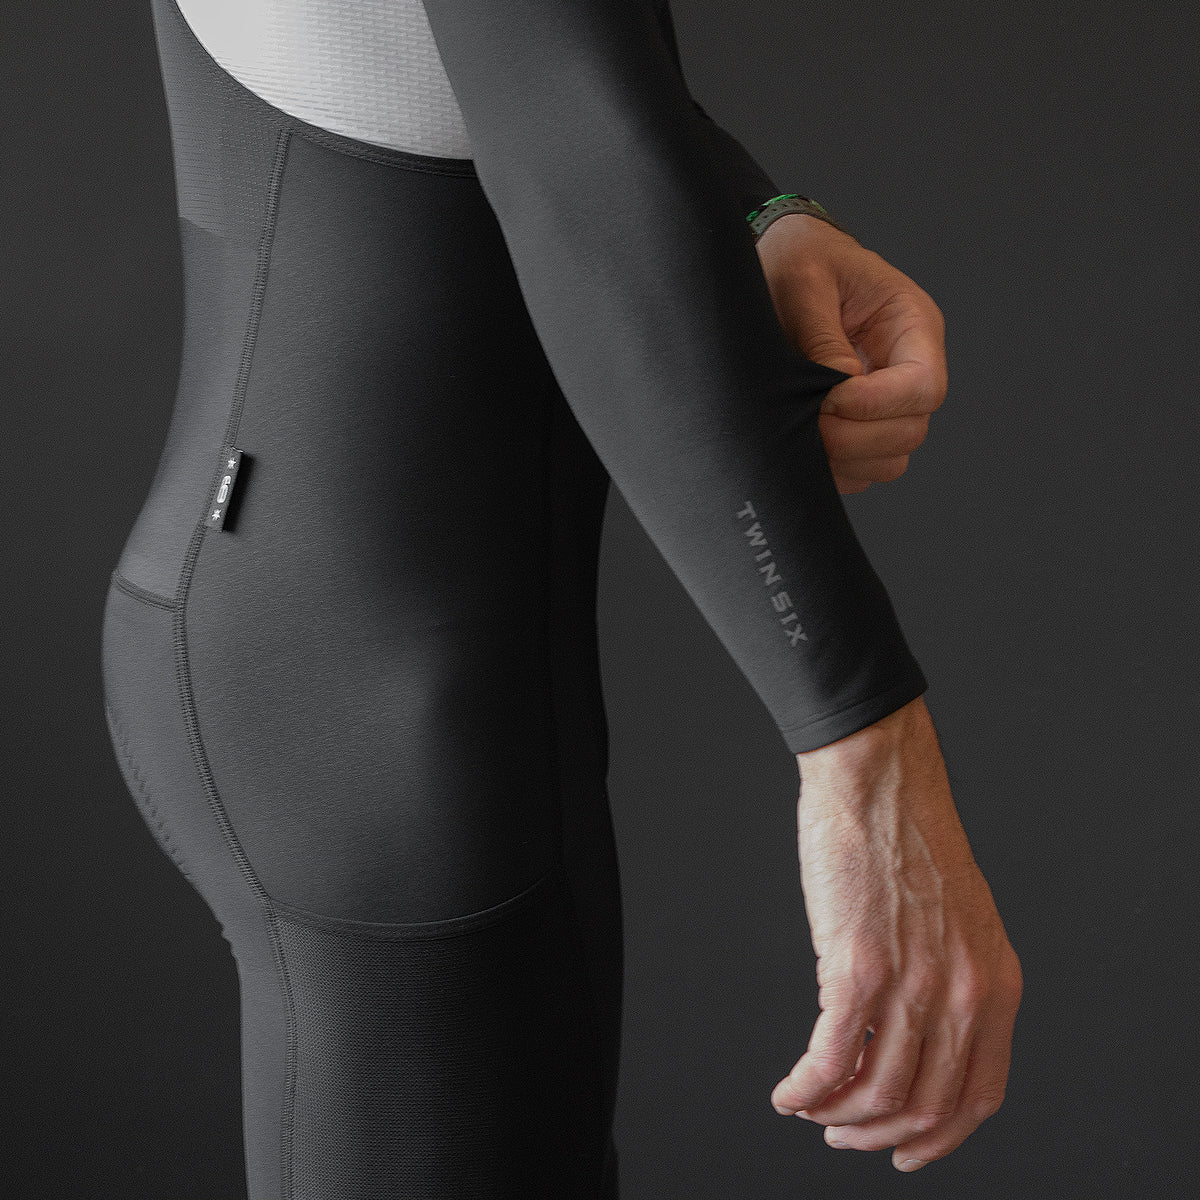 New Thermal Arm Warmers